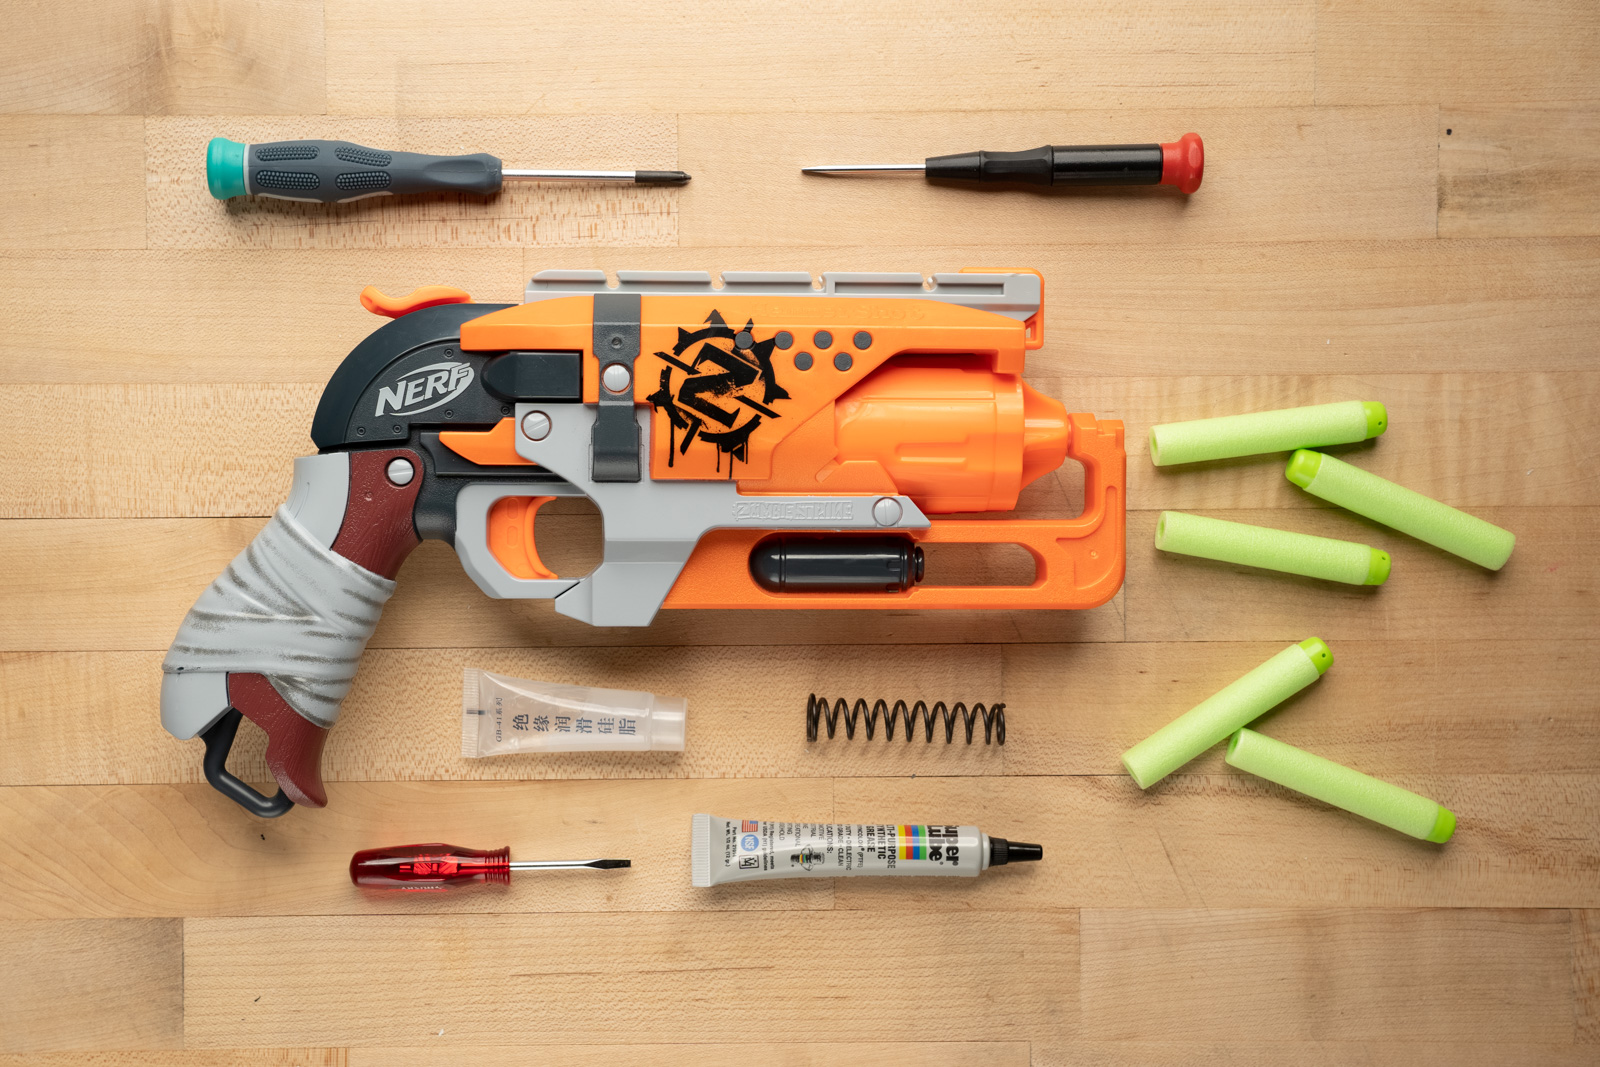 How Mod a Nerf Gun: An Illustrated Beginner's the Hammershot - The Manual